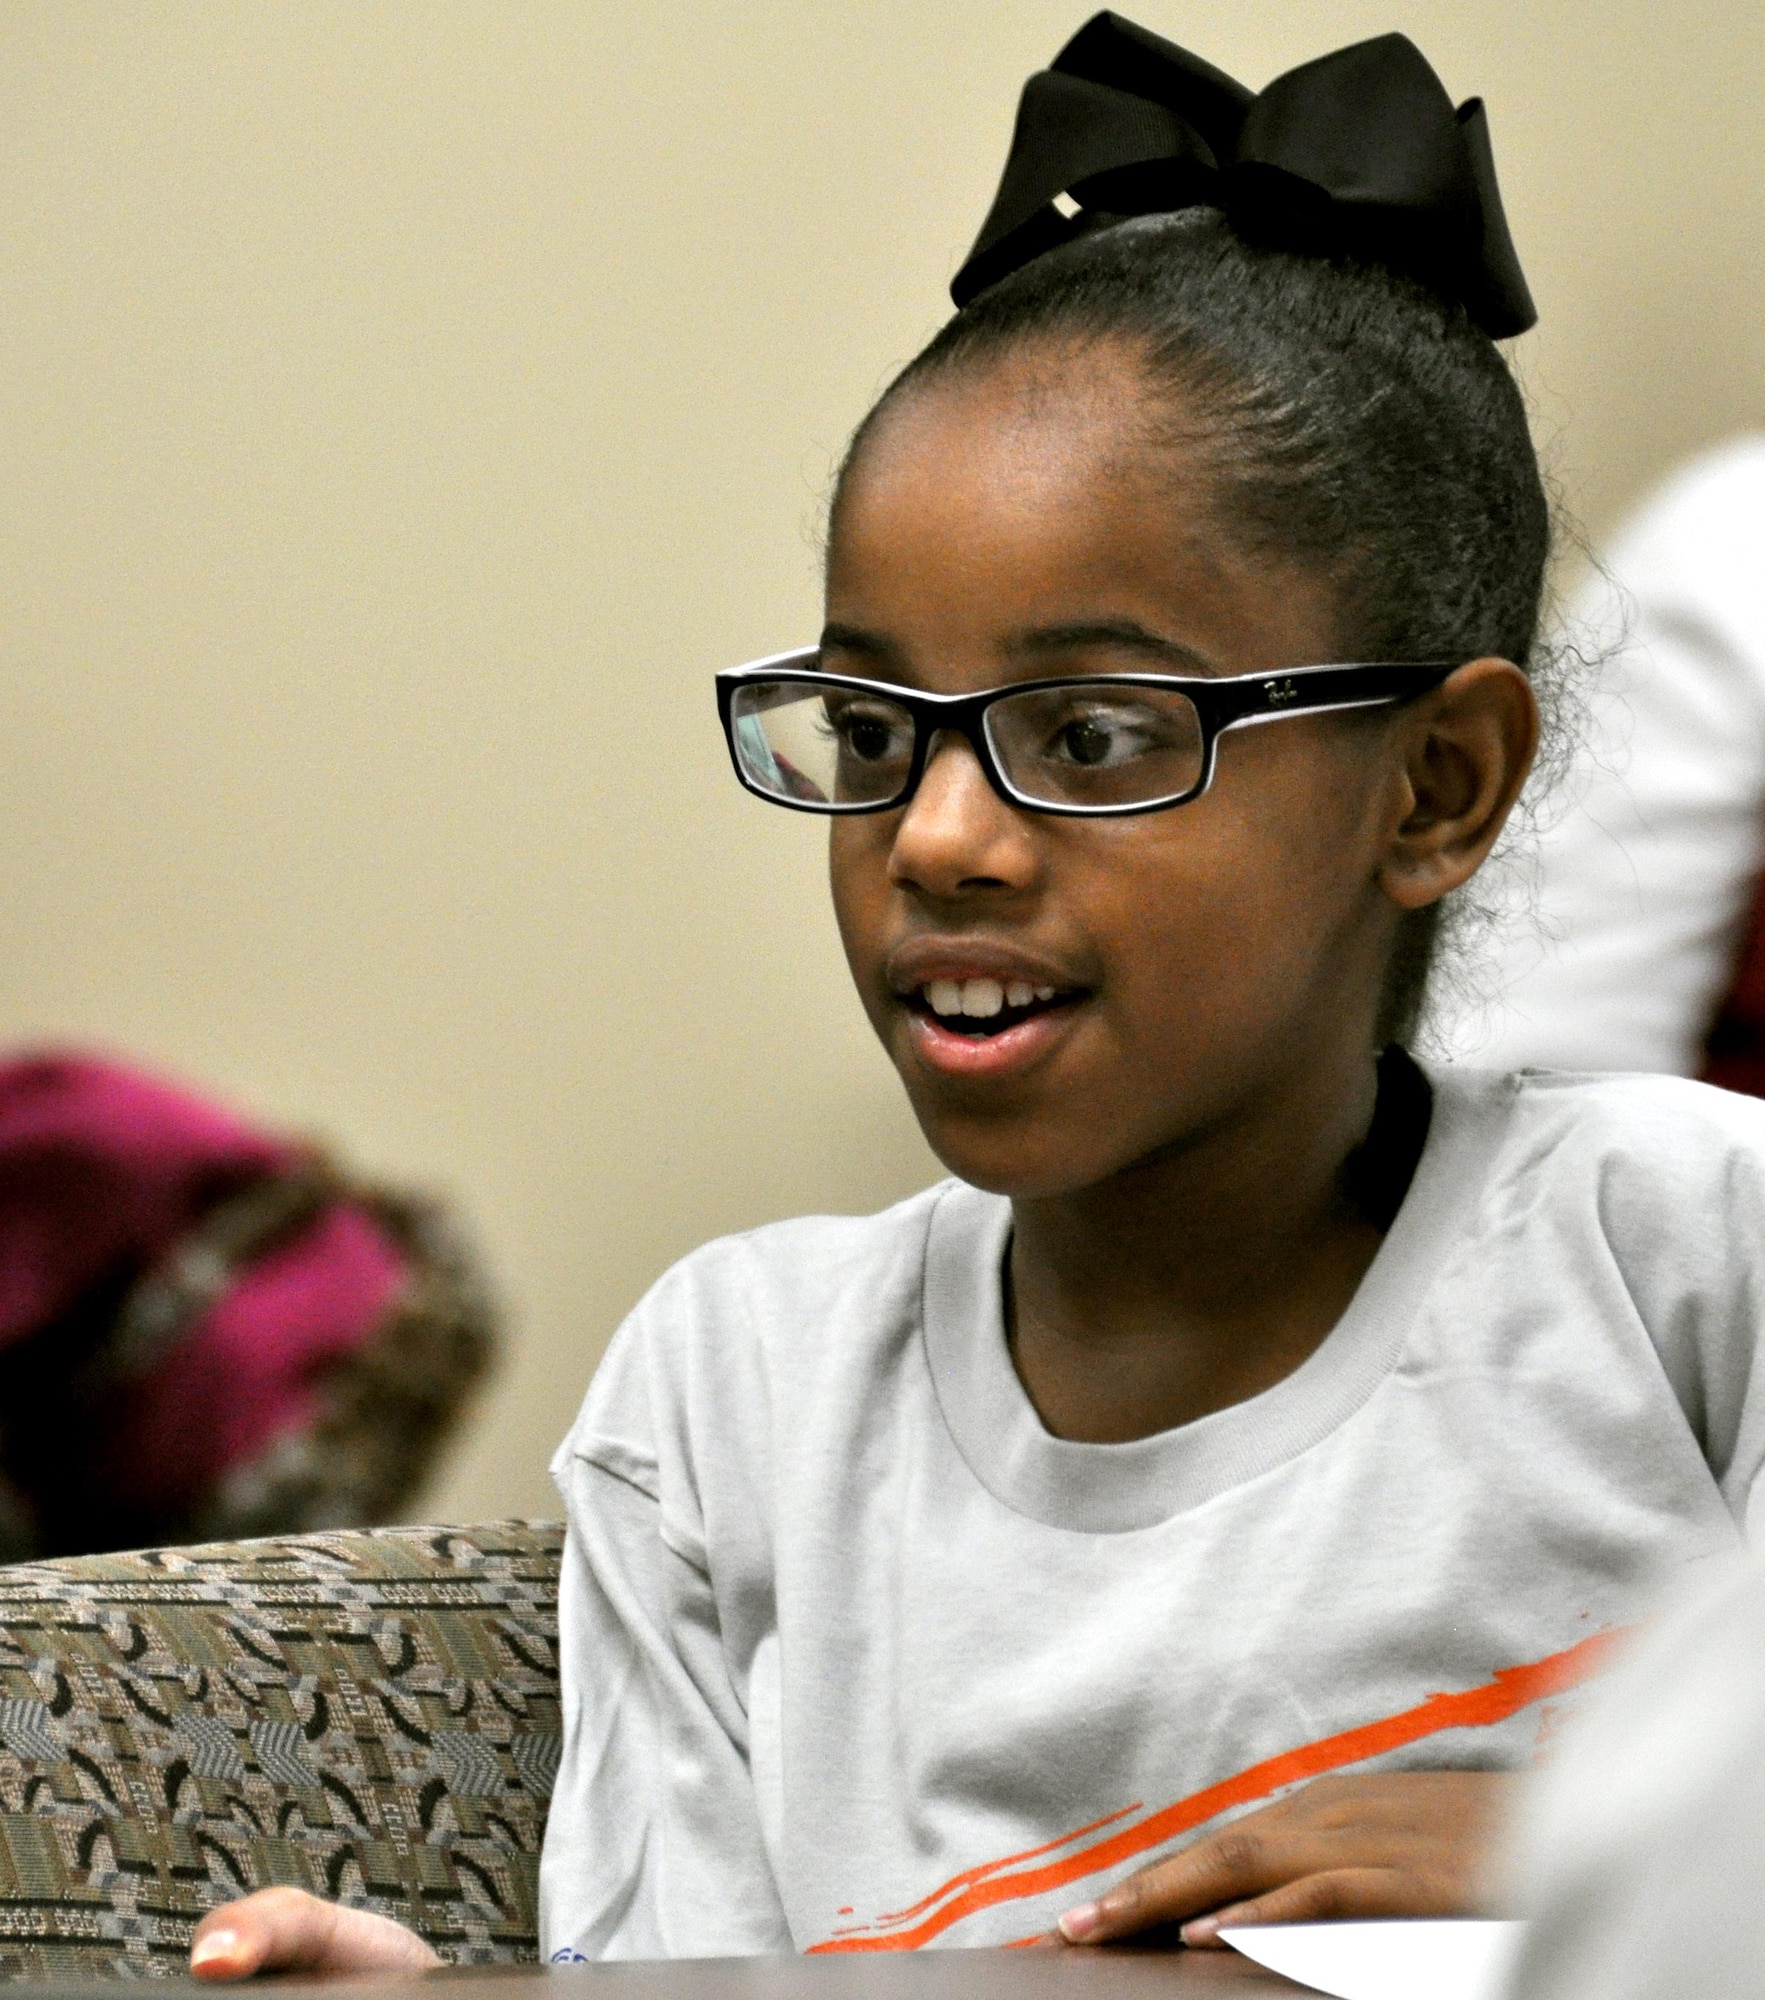 Anayah Meyer, a student at Bright Star Elementary in Douglasville, Ga. asks Maj. Gen. Stayce Harris, 22nd Air Force commander, a question at the 22nd AF headquarters at Dobbins Air Reserve Base, Ga., Feb. 7, 2015. Ten students from Bright Star visited the installation to interview Harris for Black History month. (U.S. Air Force photo/Senior Airman Daniel Phelps)